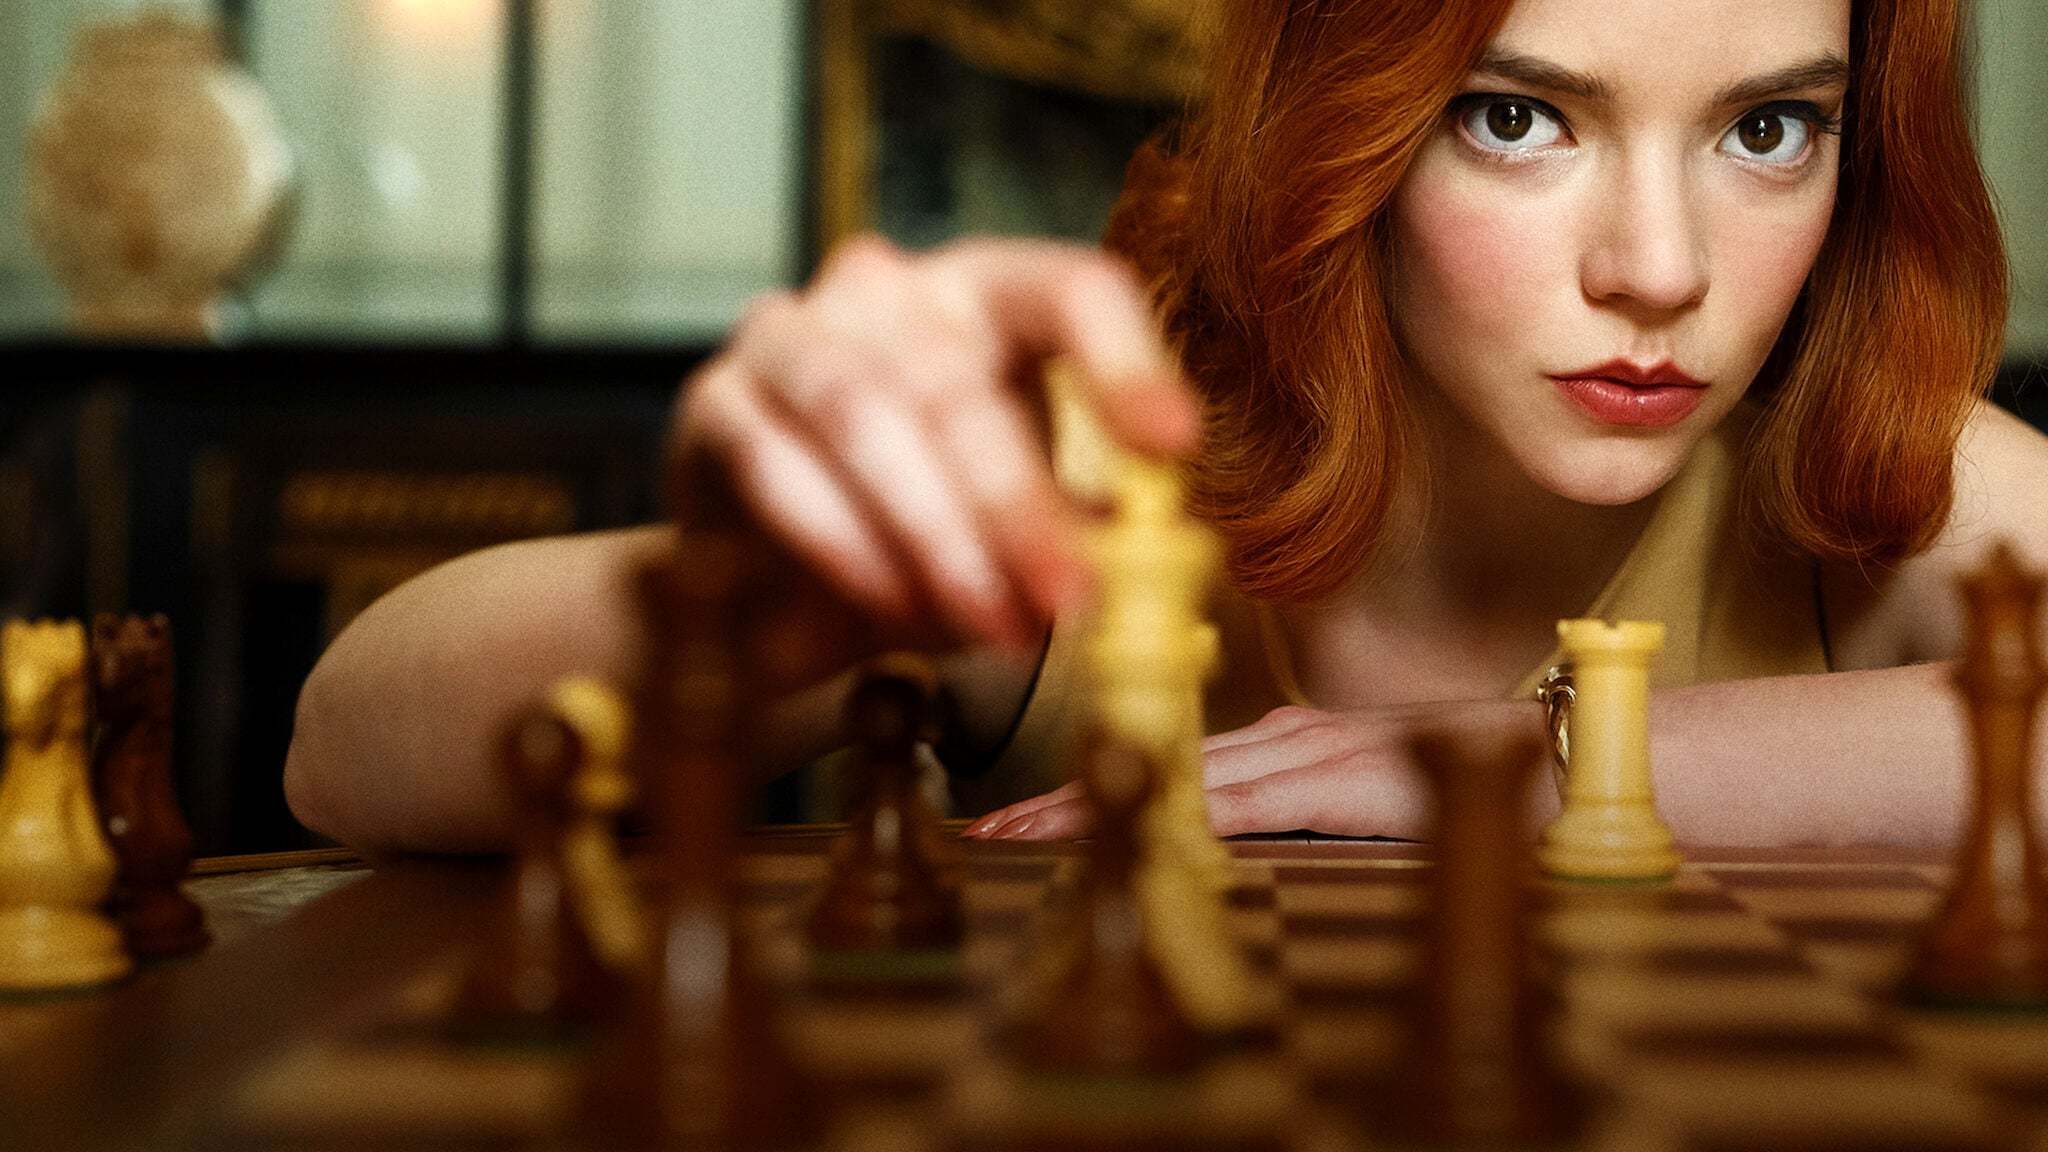 The Queen's Gambit' Review: How To Own Your Genius Like Elizabeth